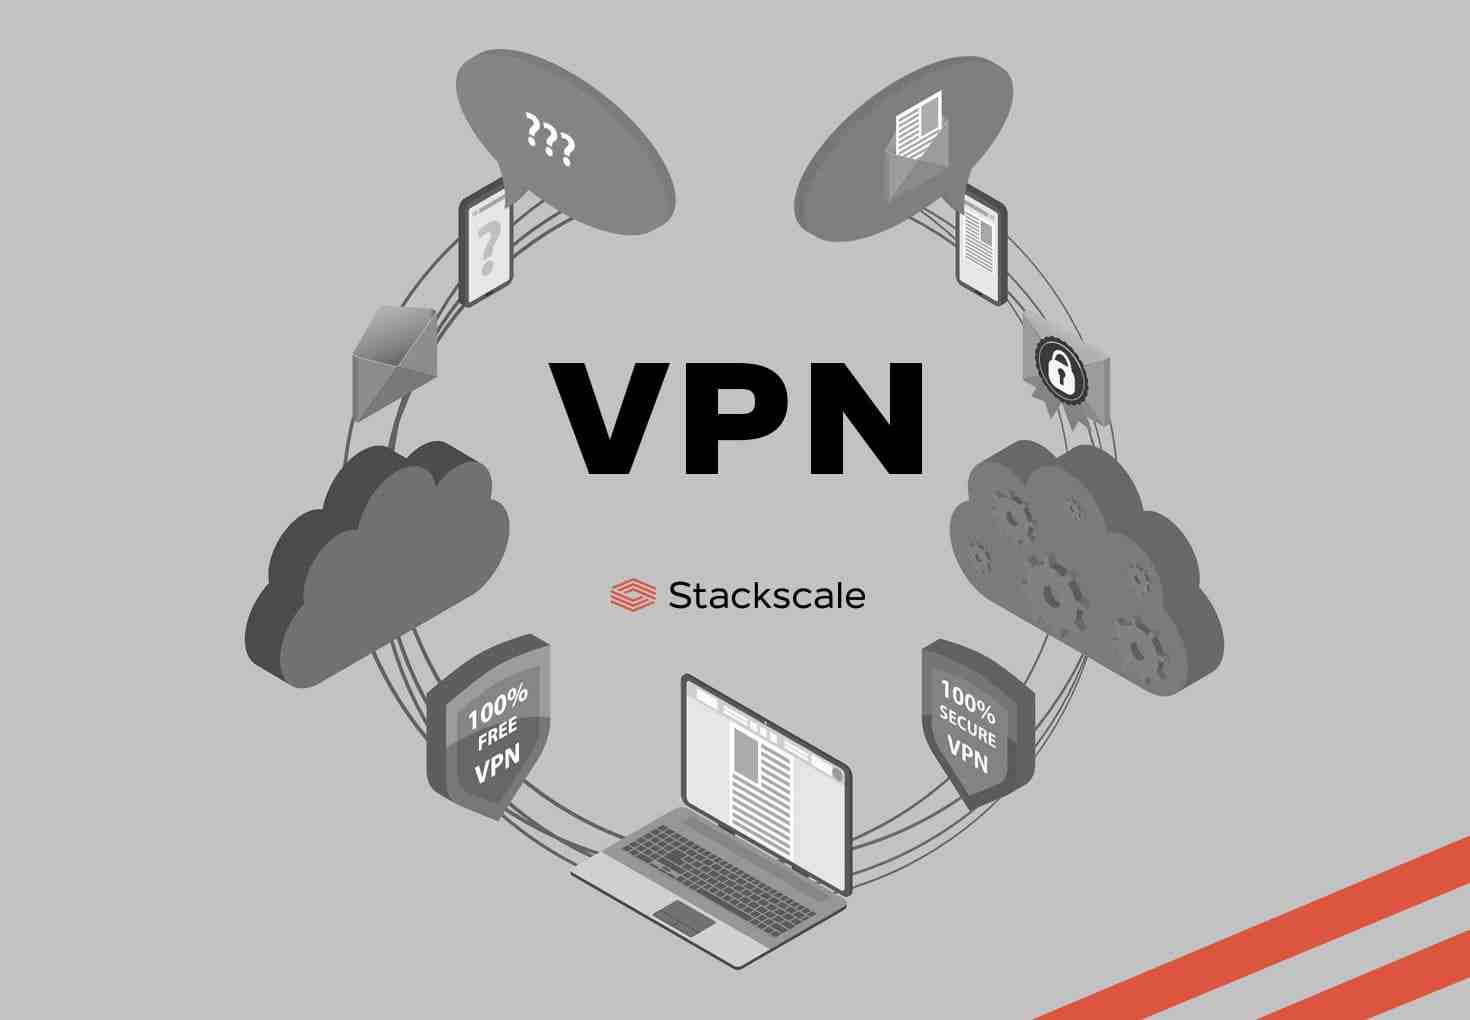 Whats VPN stand for?